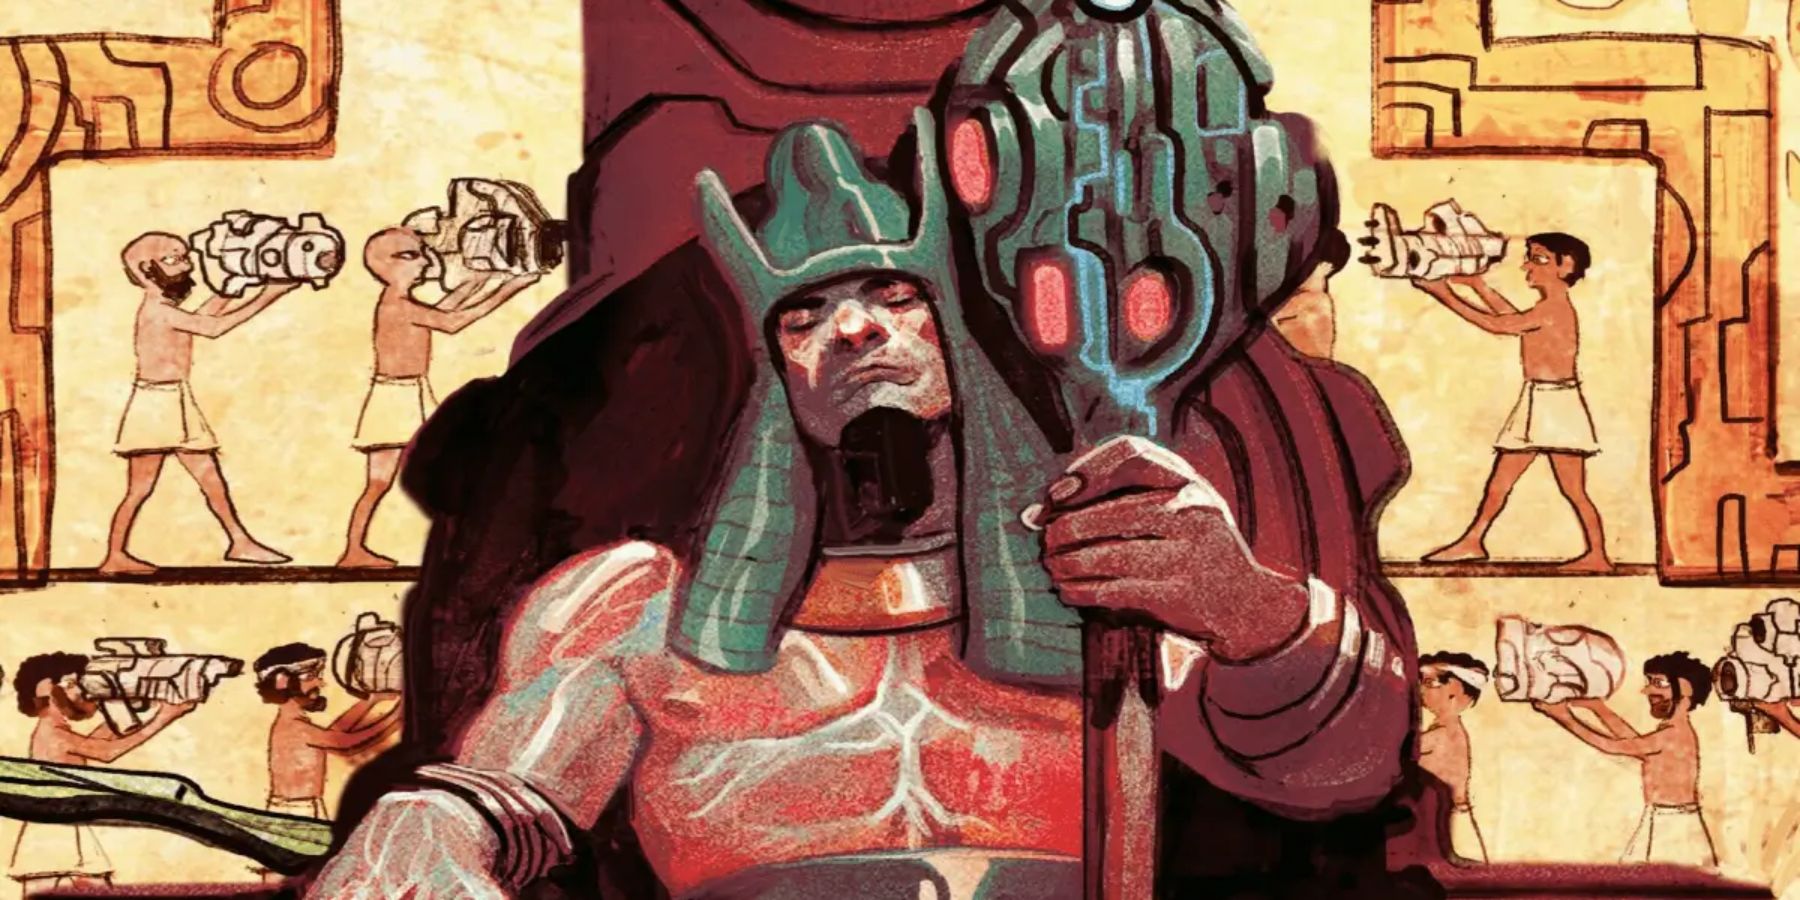 Kang the Conqueror as Rama-Tut variant in Marvel Comics